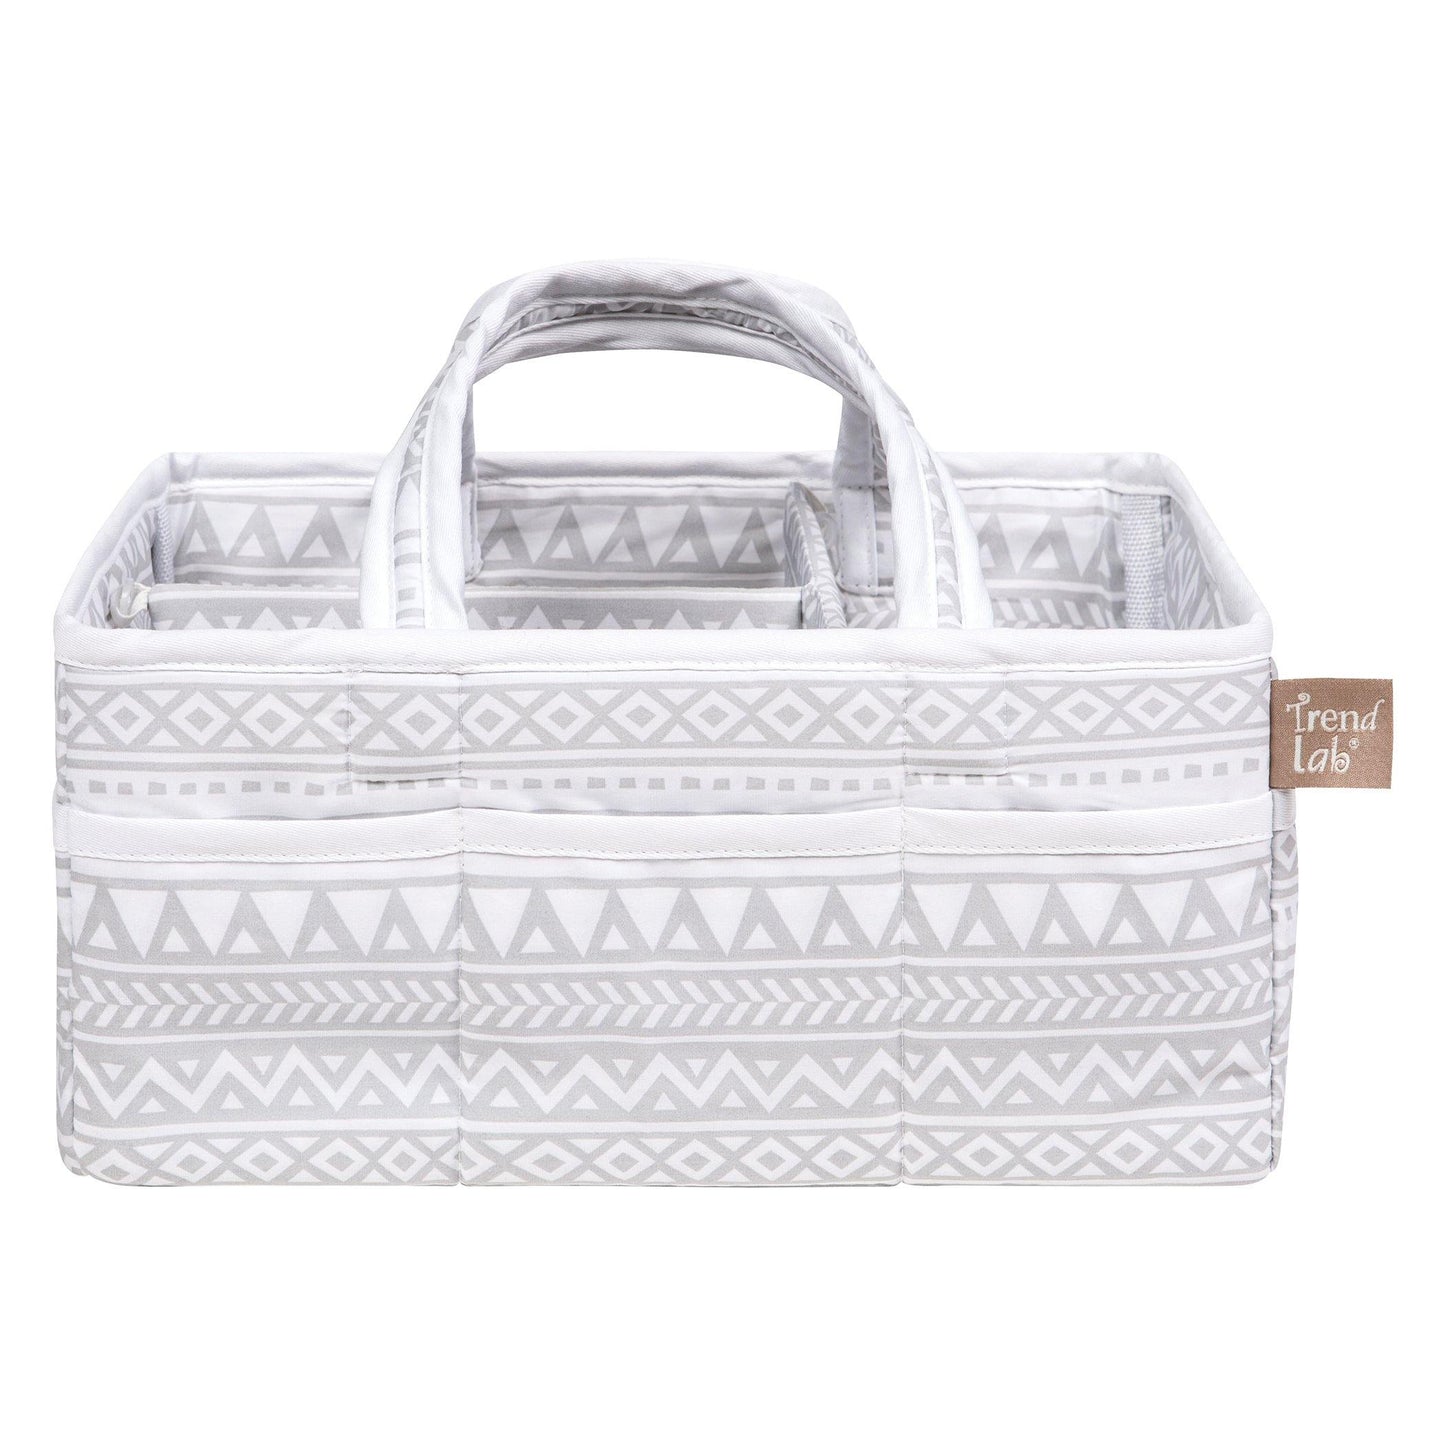 Aztec Forest Storage Caddy Main Image- The body, lining and handles feature an Aztec print in gray and white and a solid white trim.